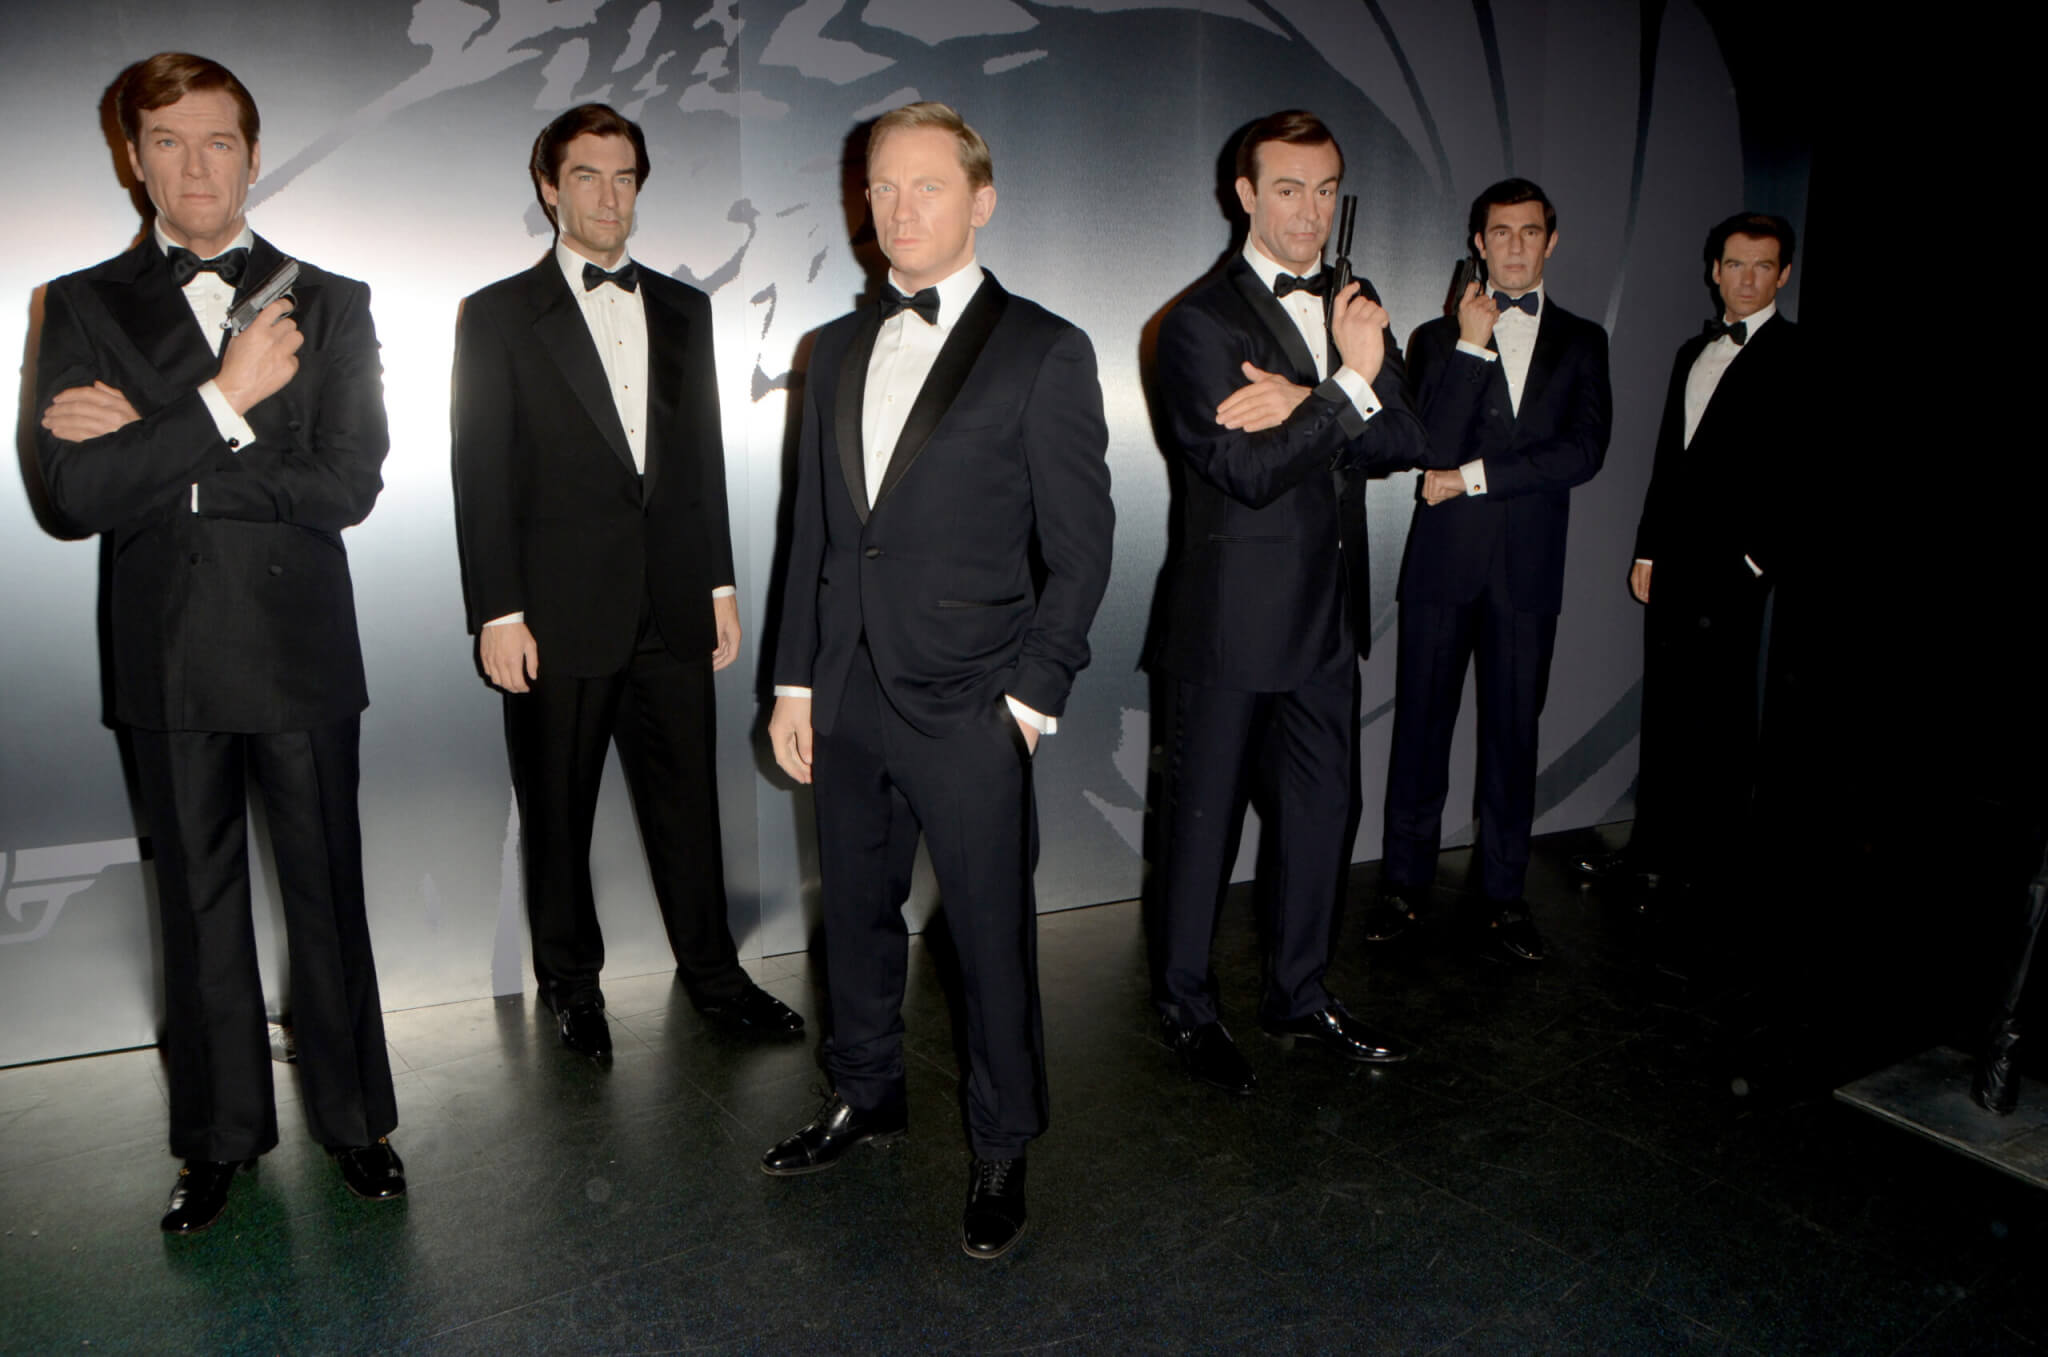 Wax figures of Six Bond actors at the Madame Tussauds Hollywood